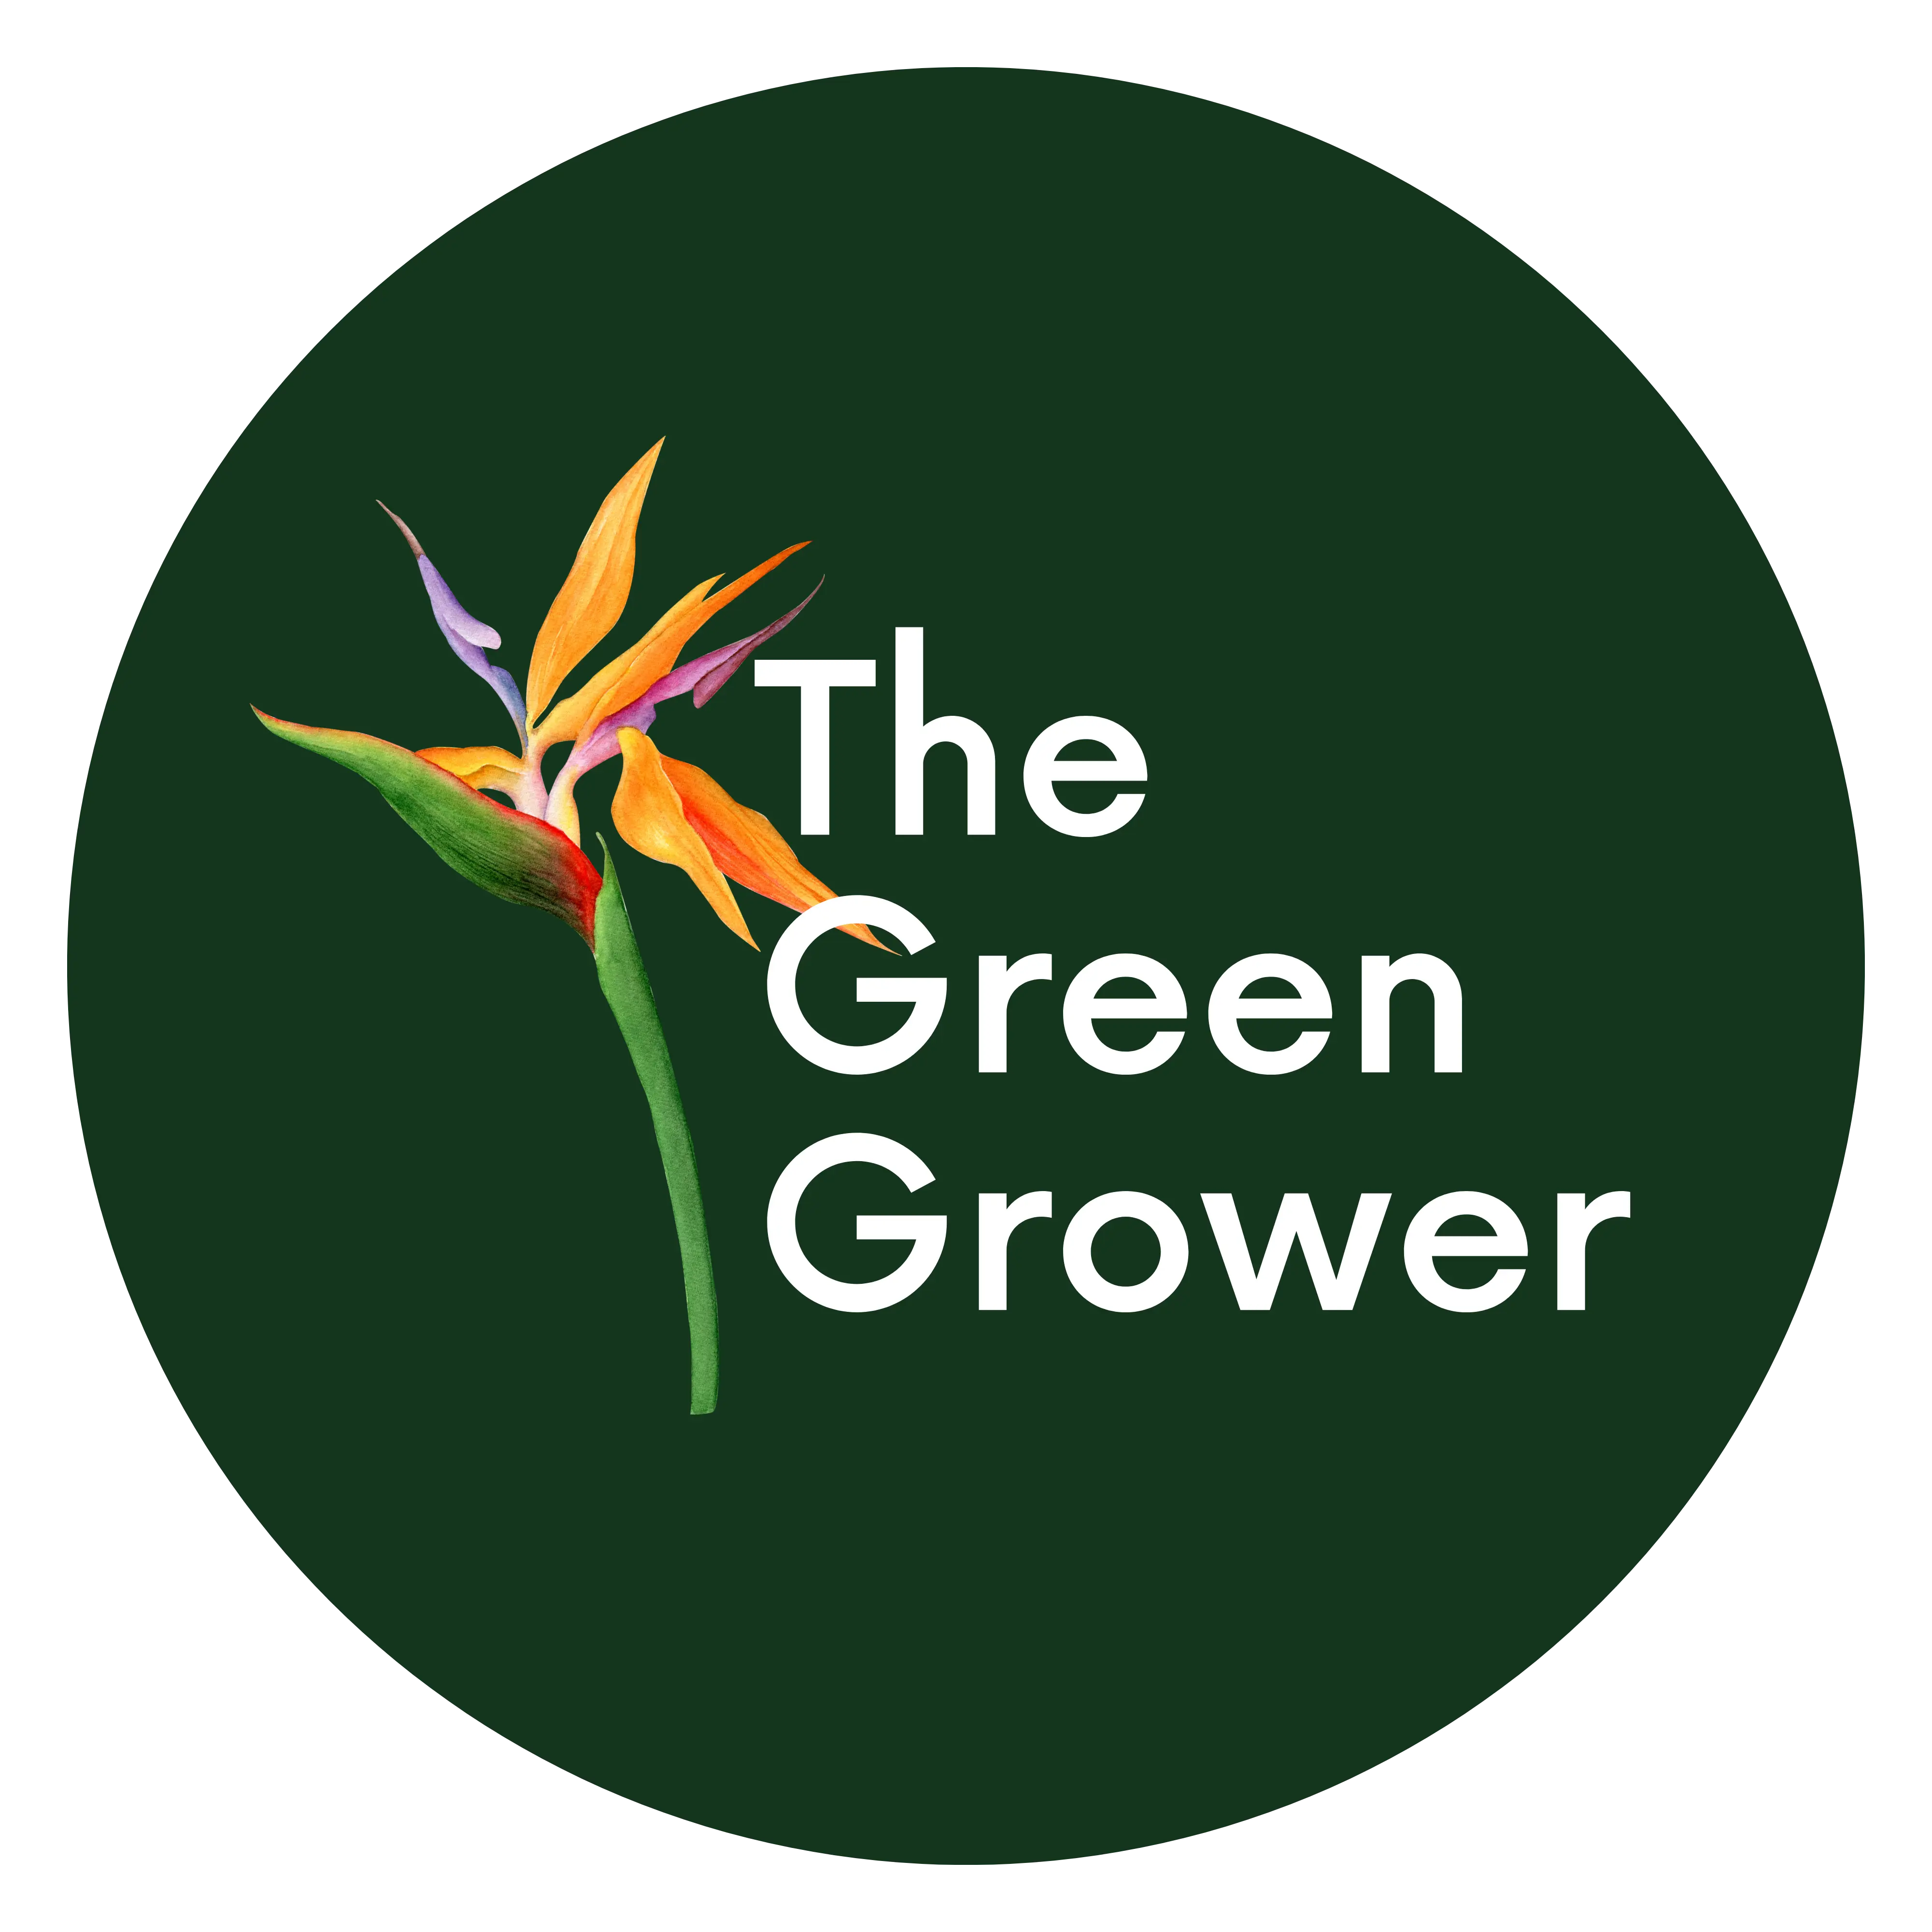 The Green Grower